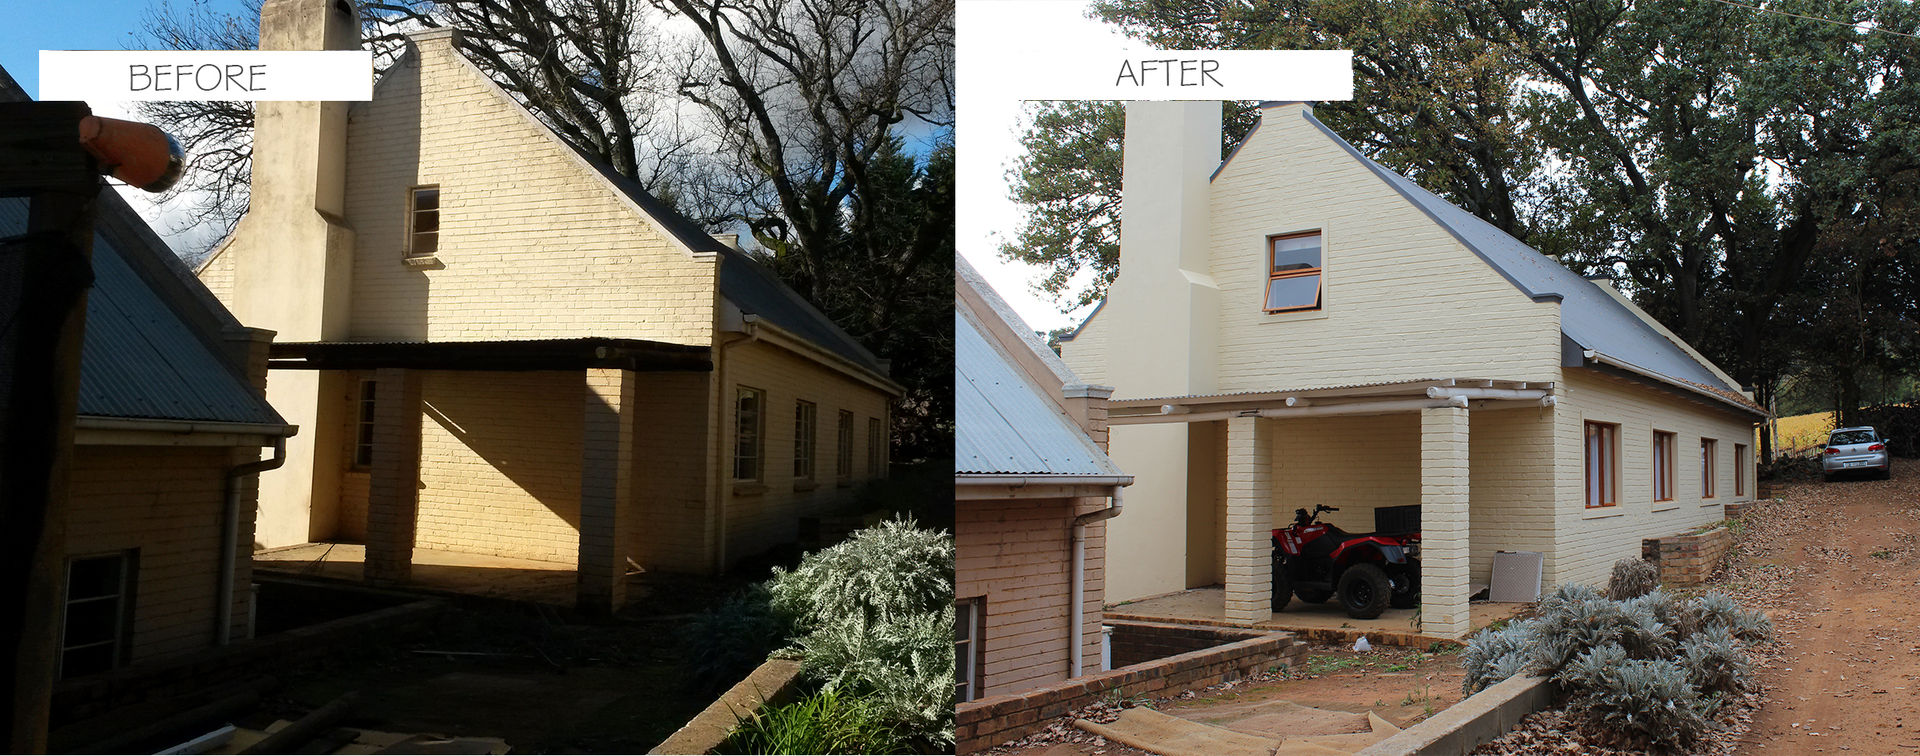 Before & After Covet Design Houses